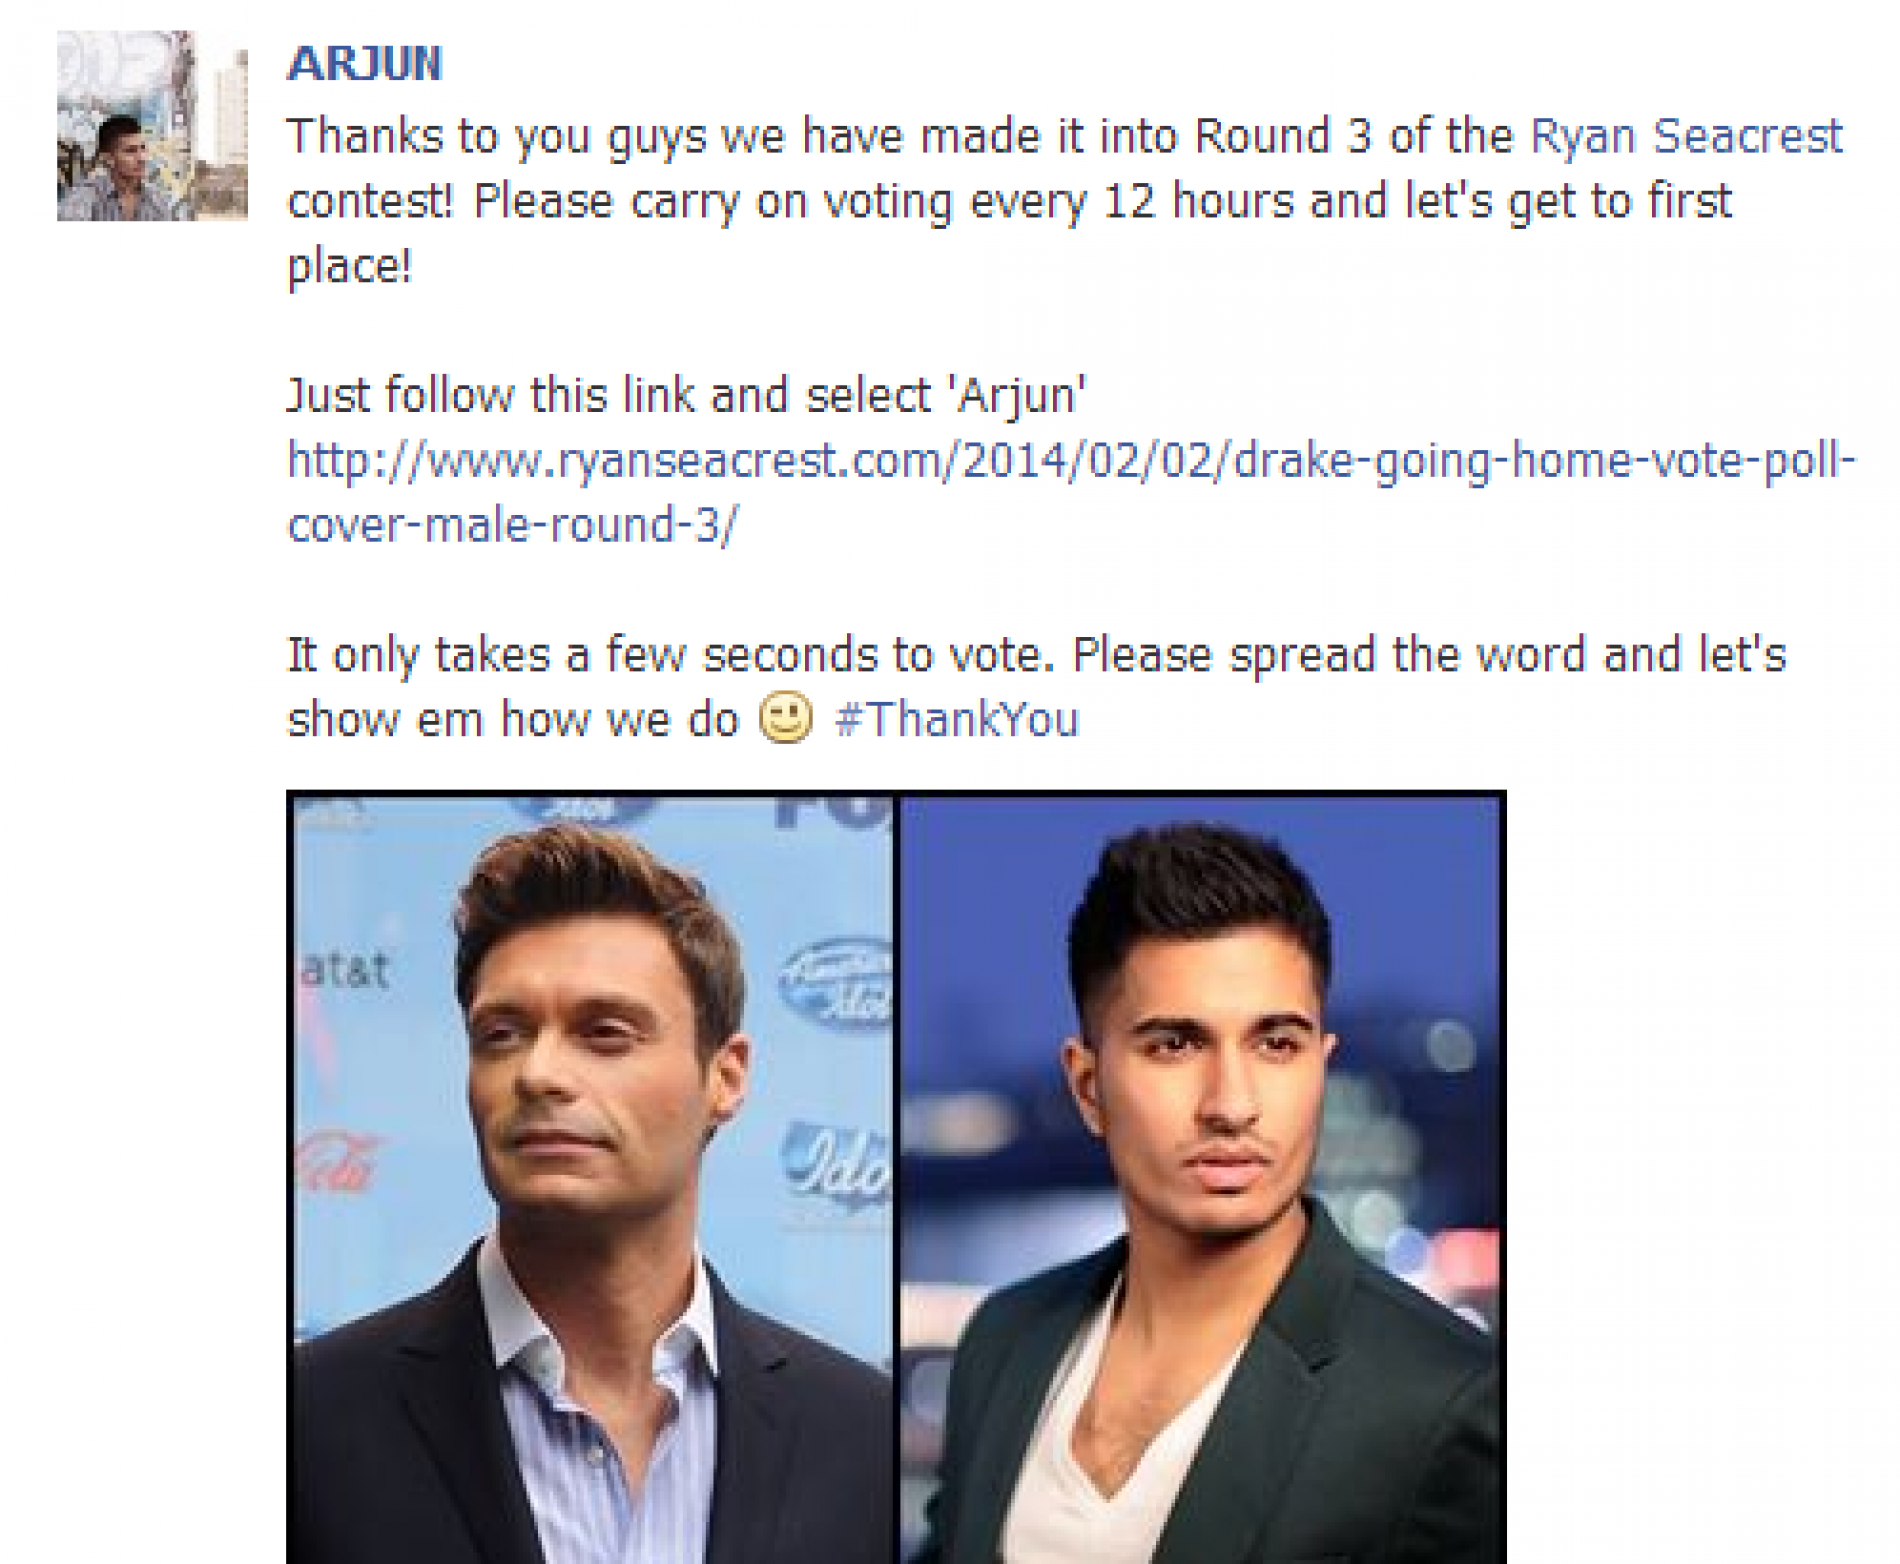 Vote For Arjun Cuz He’s At Round 3